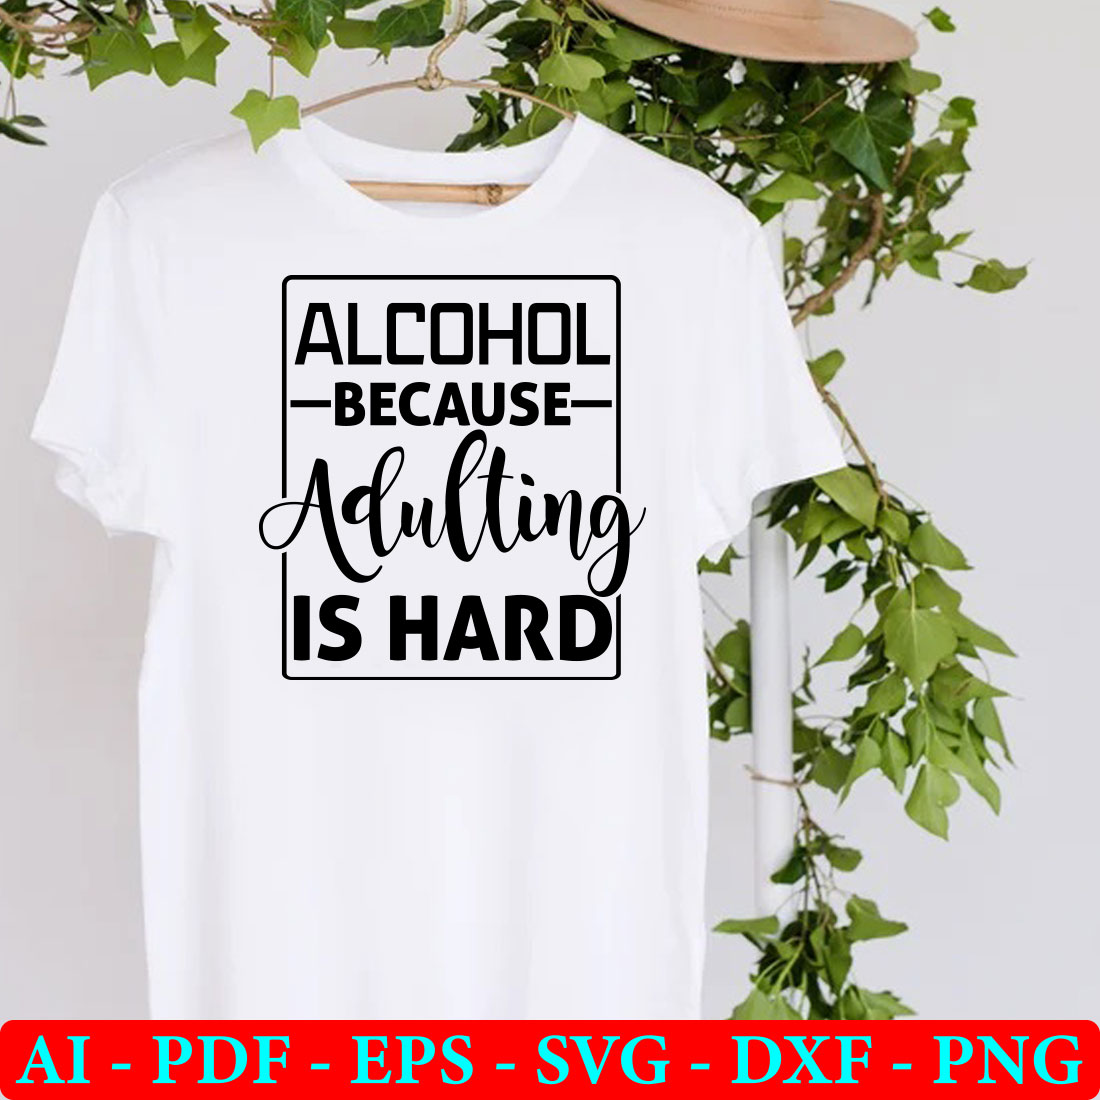 T - shirt that says alcohol because adulting is hard.